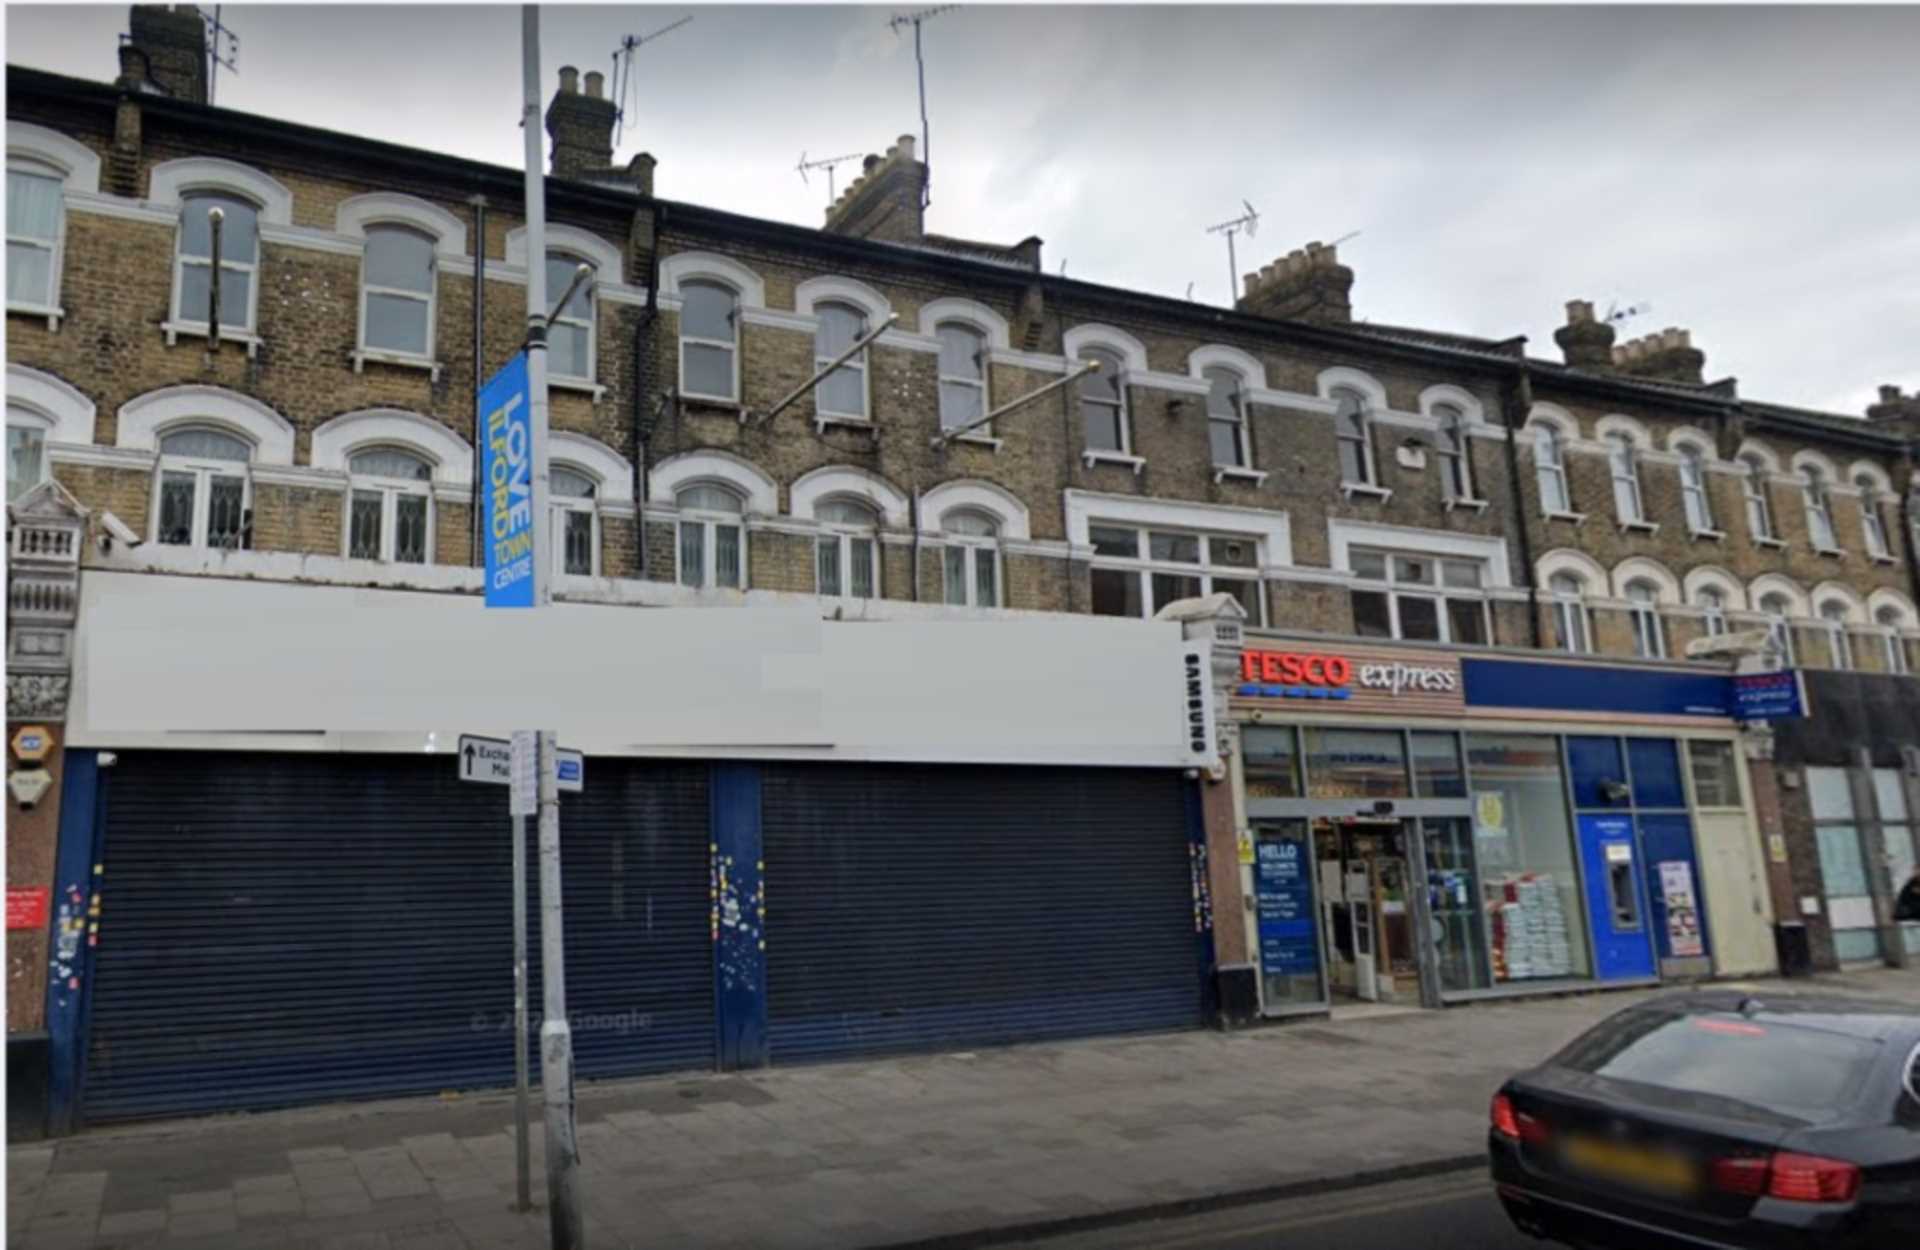 Retail Property (High Street) for rent in Ilford. From Next Property - London